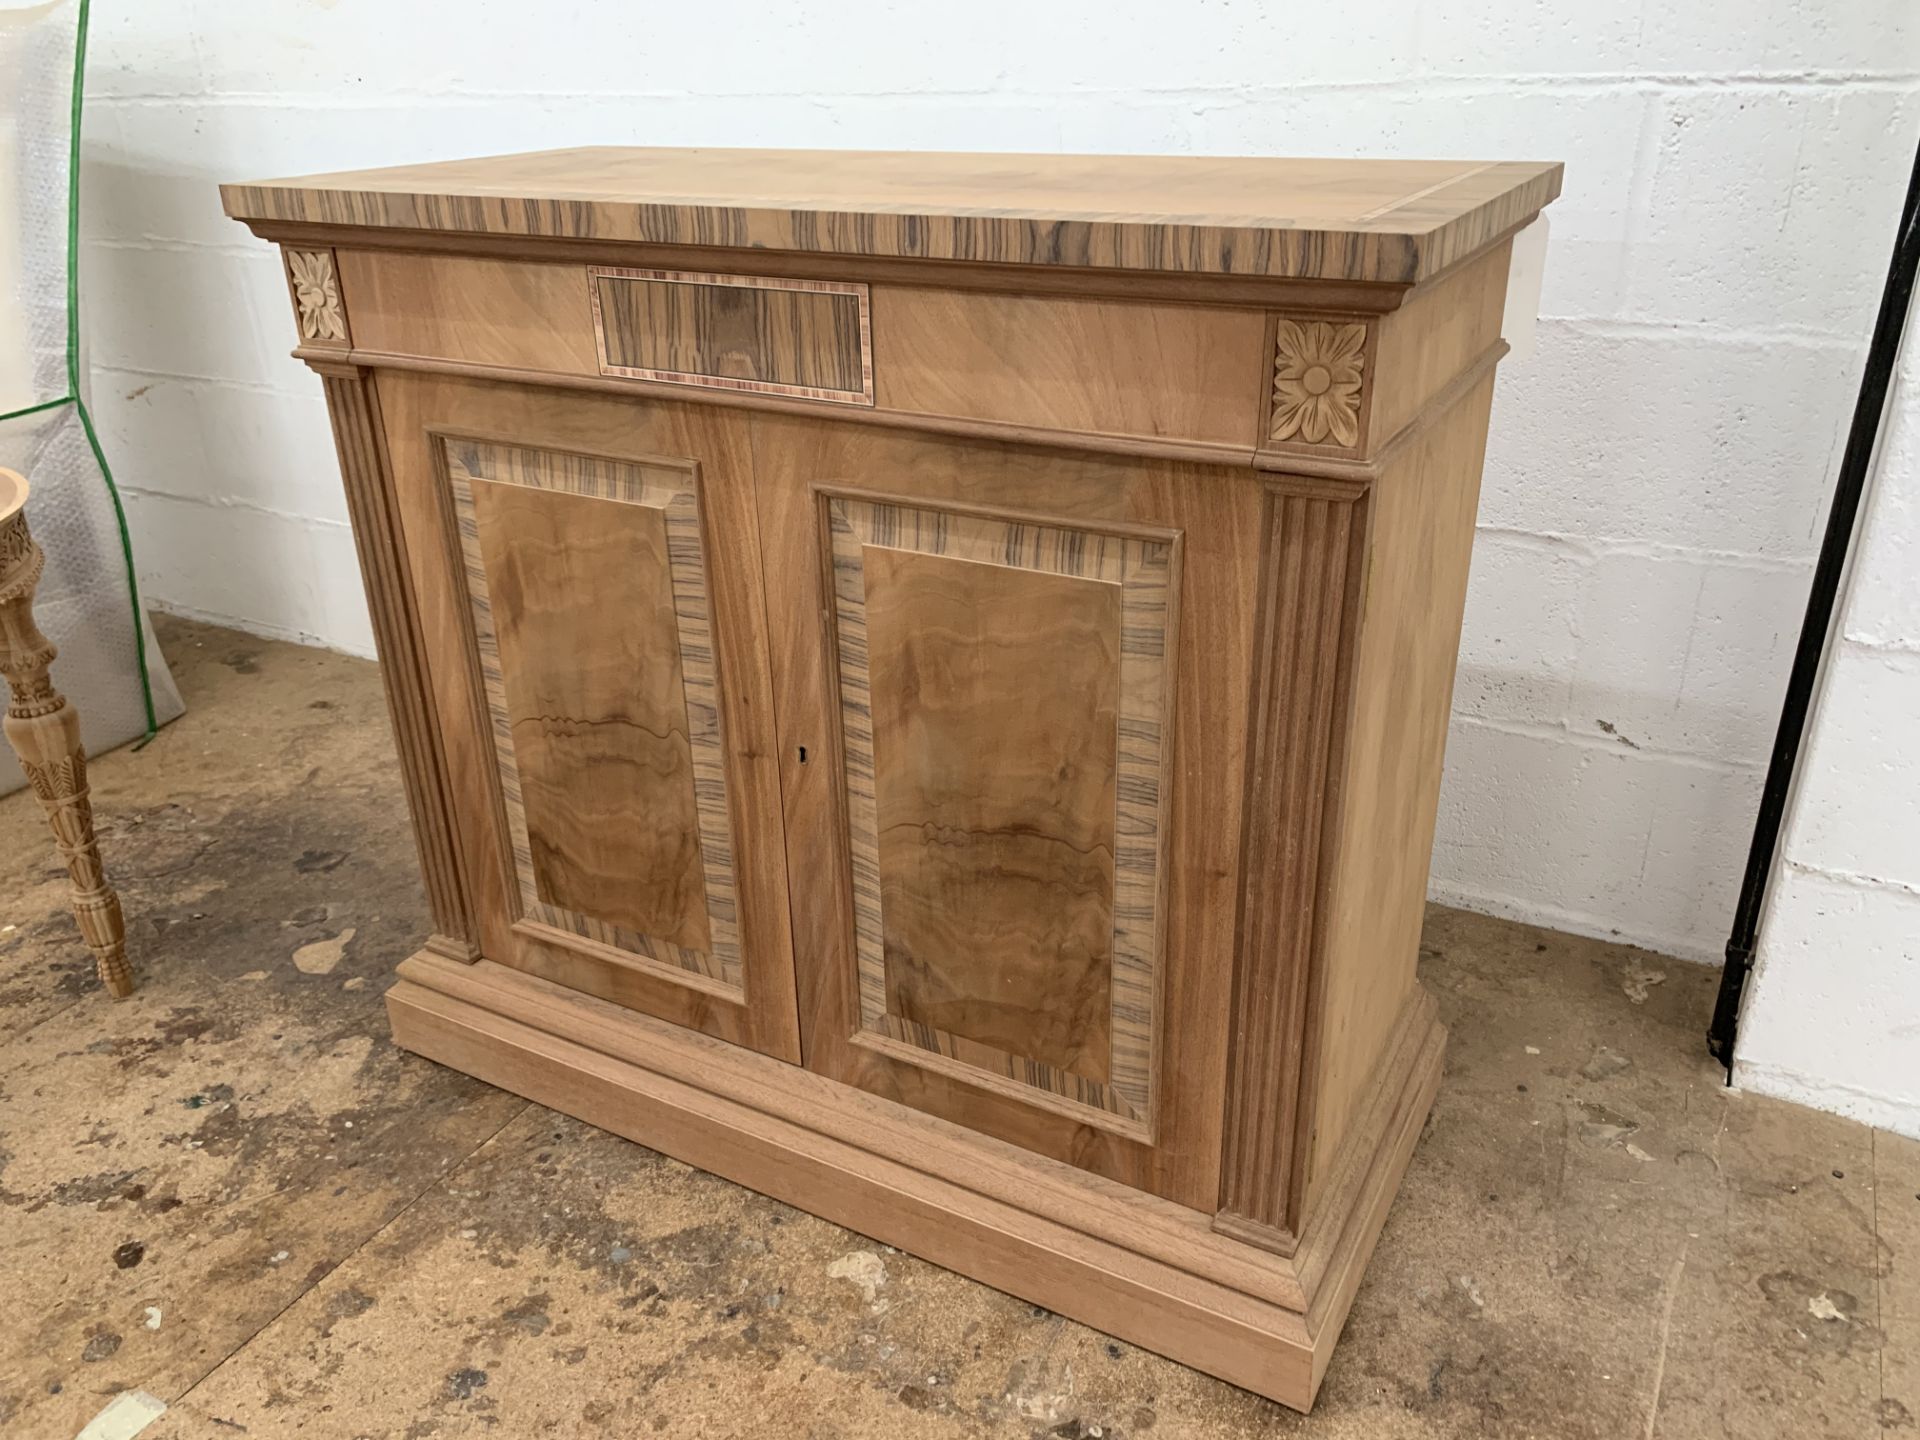 Small two-door Sideboard, in Mahogany finish, from the Corinthian range, requires finishing/